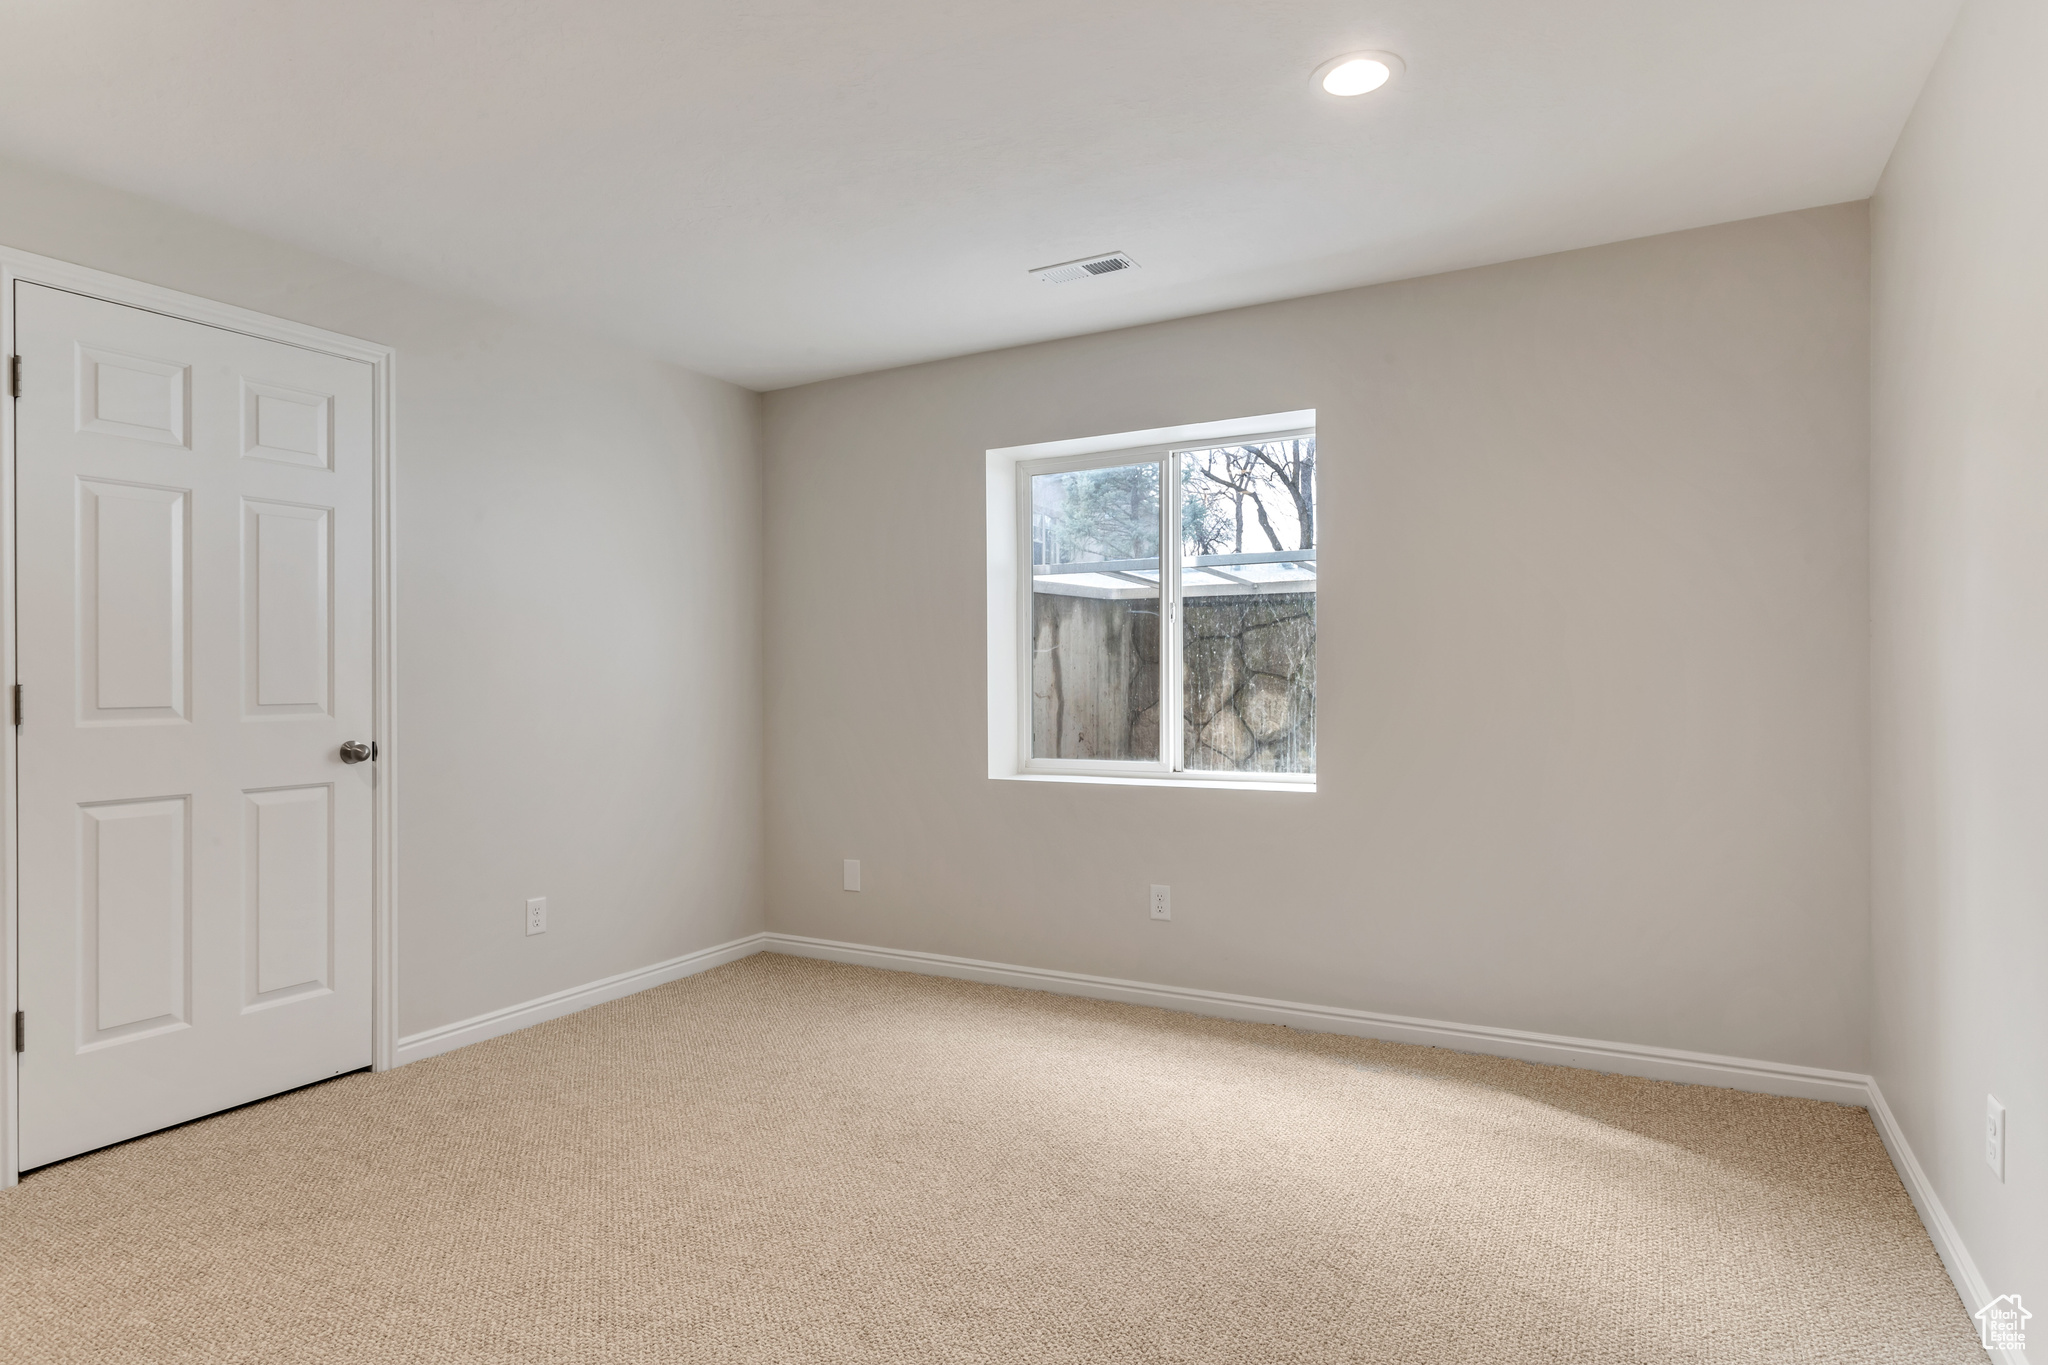 One of two bedrooms in basement with large window and new carpet